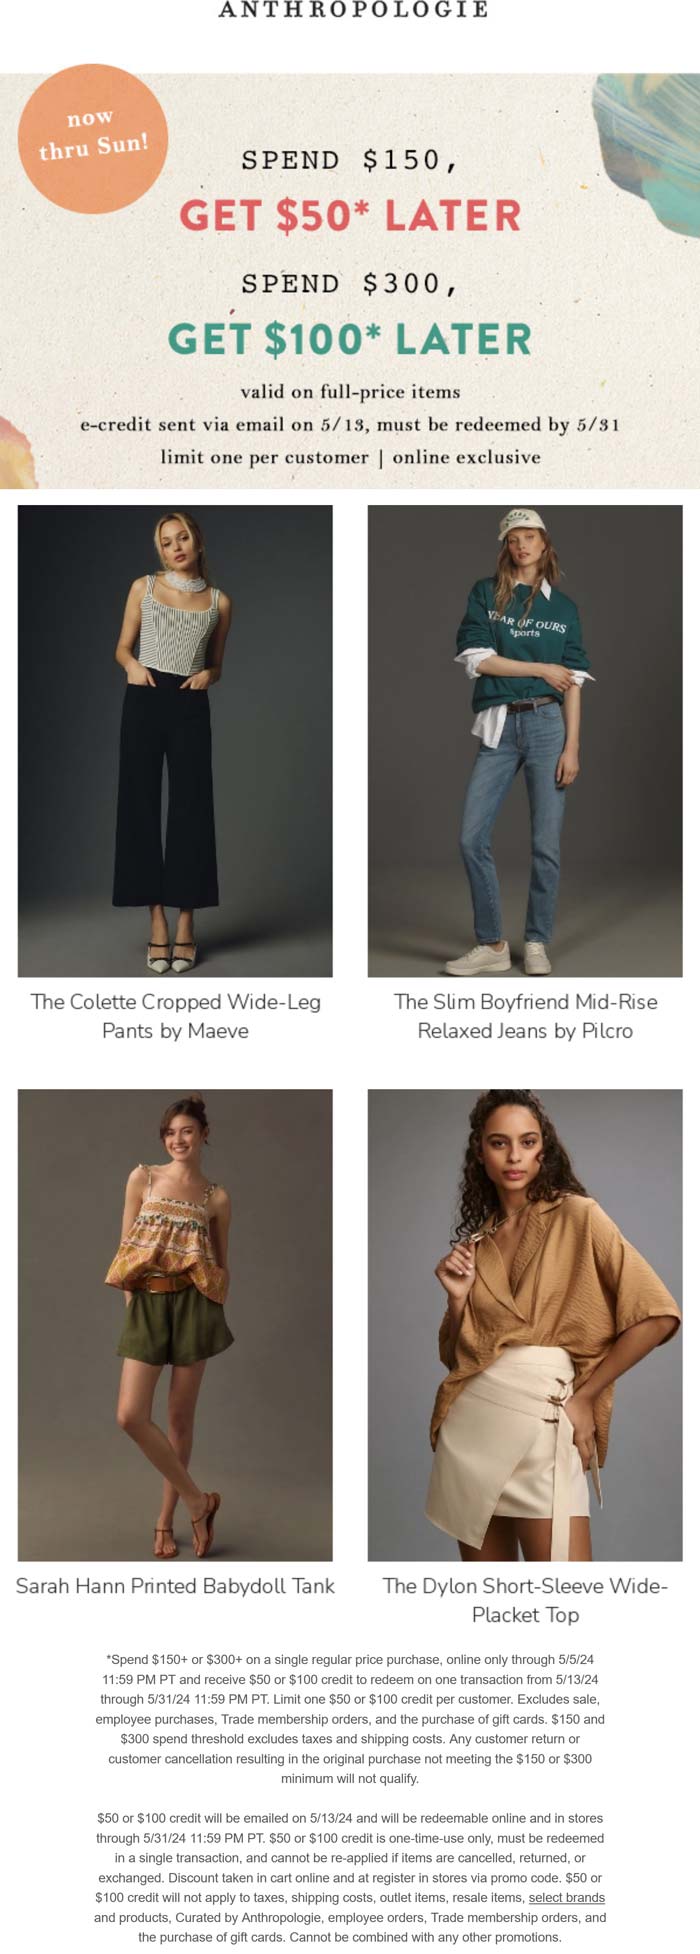 Anthropologie stores Coupon  $50-$100 credit on $150+ online at Anthropologie #anthropologie 